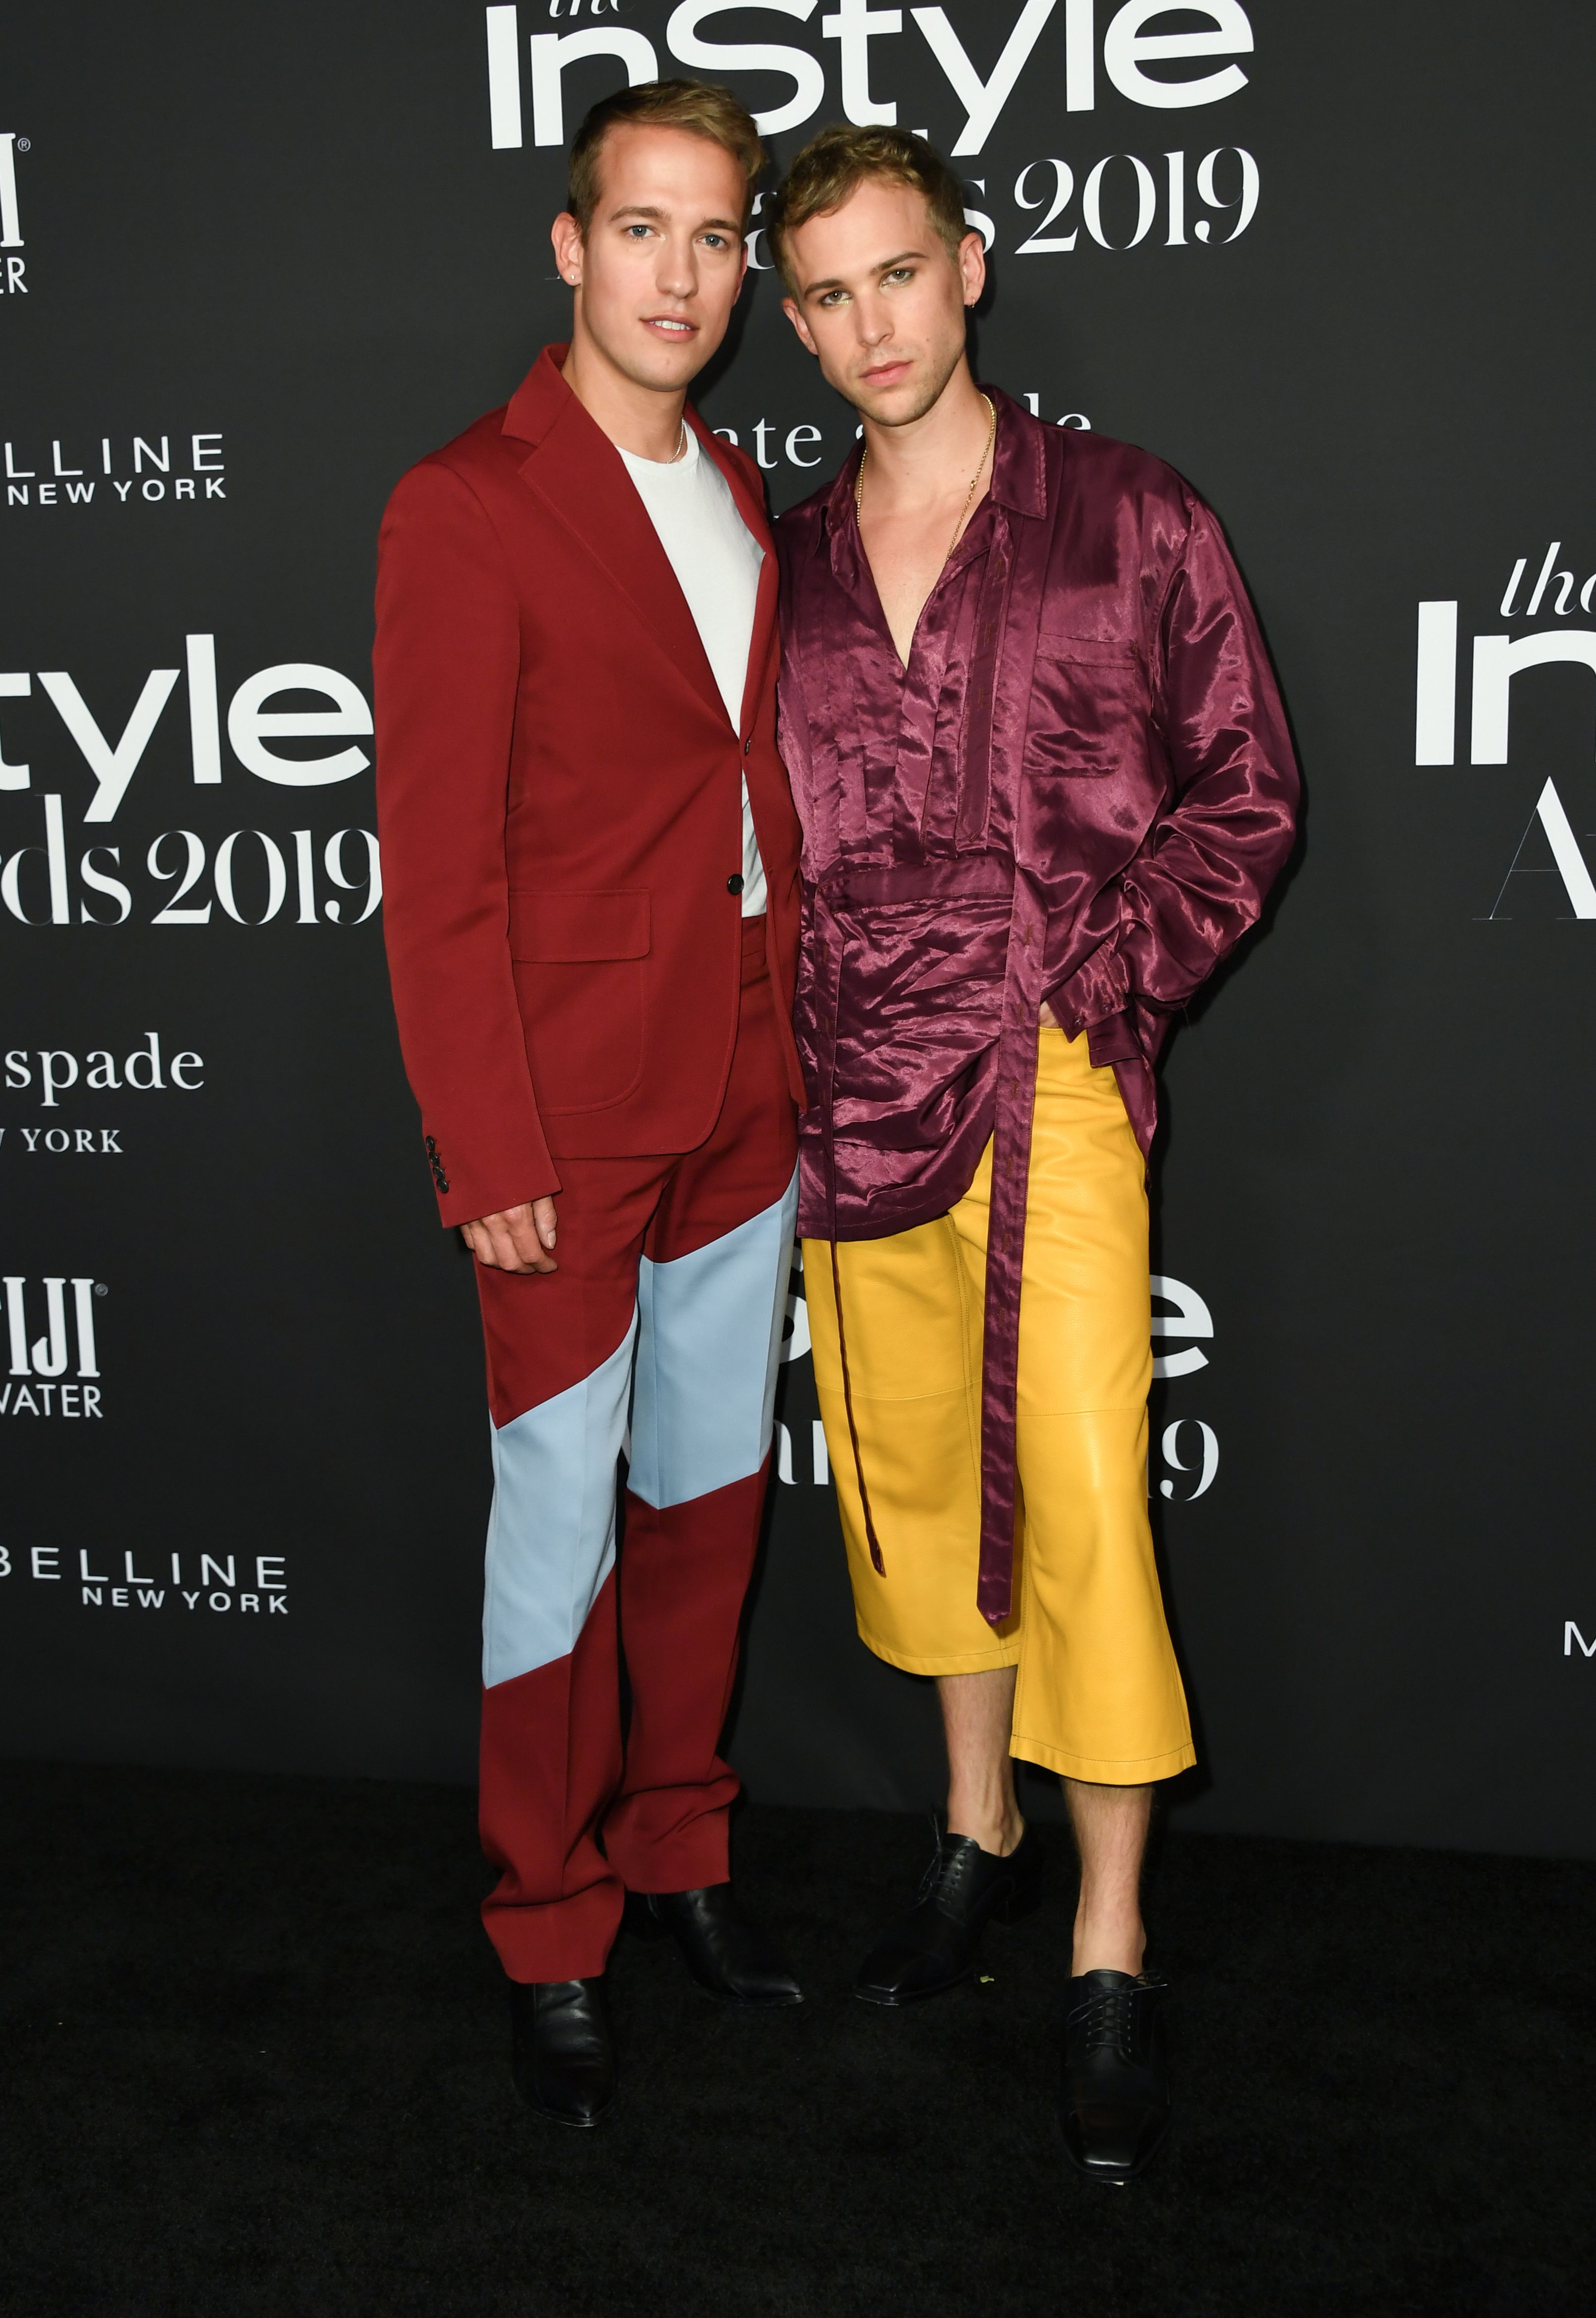 Peter Zurkuhlen and Tommy Dorfman at the 5th Annual "InStyle Awards" on October 21, 2019 | Source: Getty Images